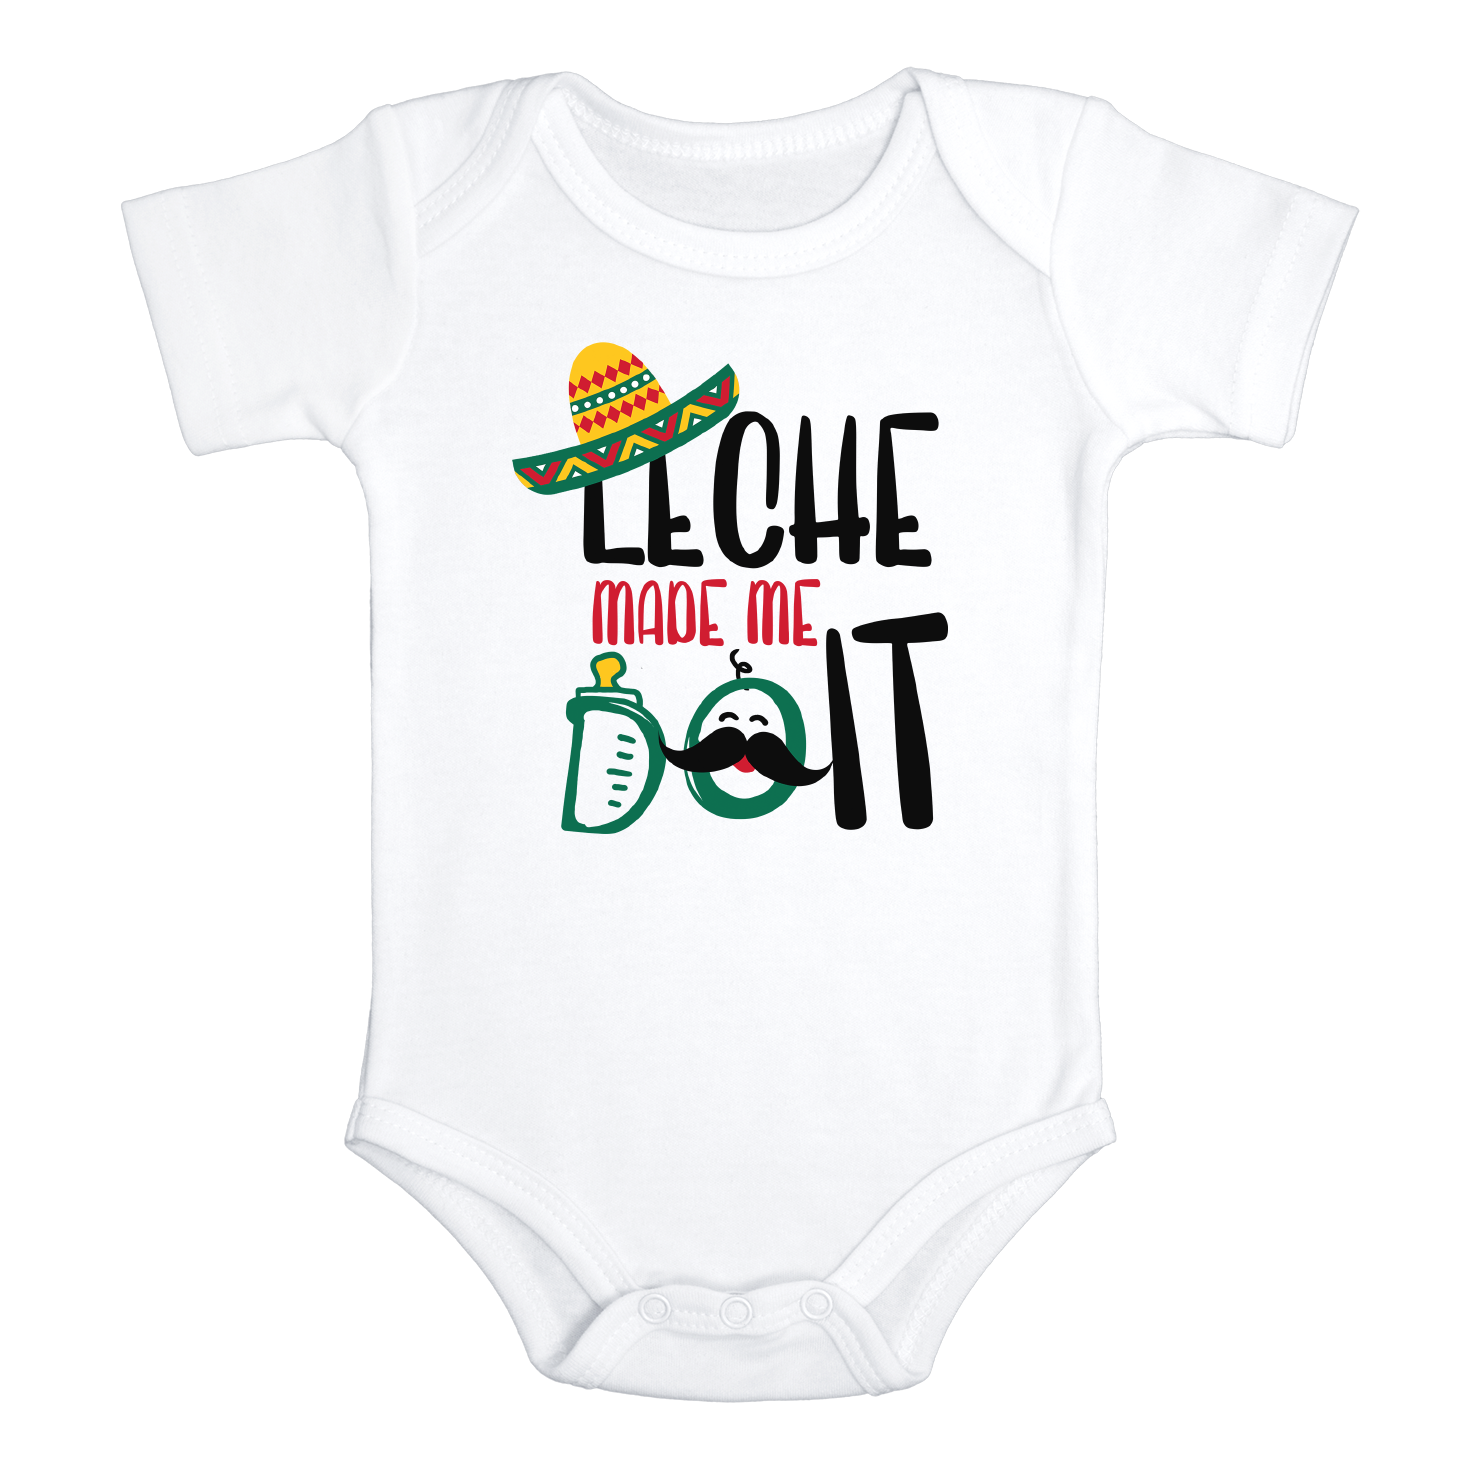 LECHE MADE ME DO IT Funny Mexican baby onesies bodysuit (white: short or long sleeve)